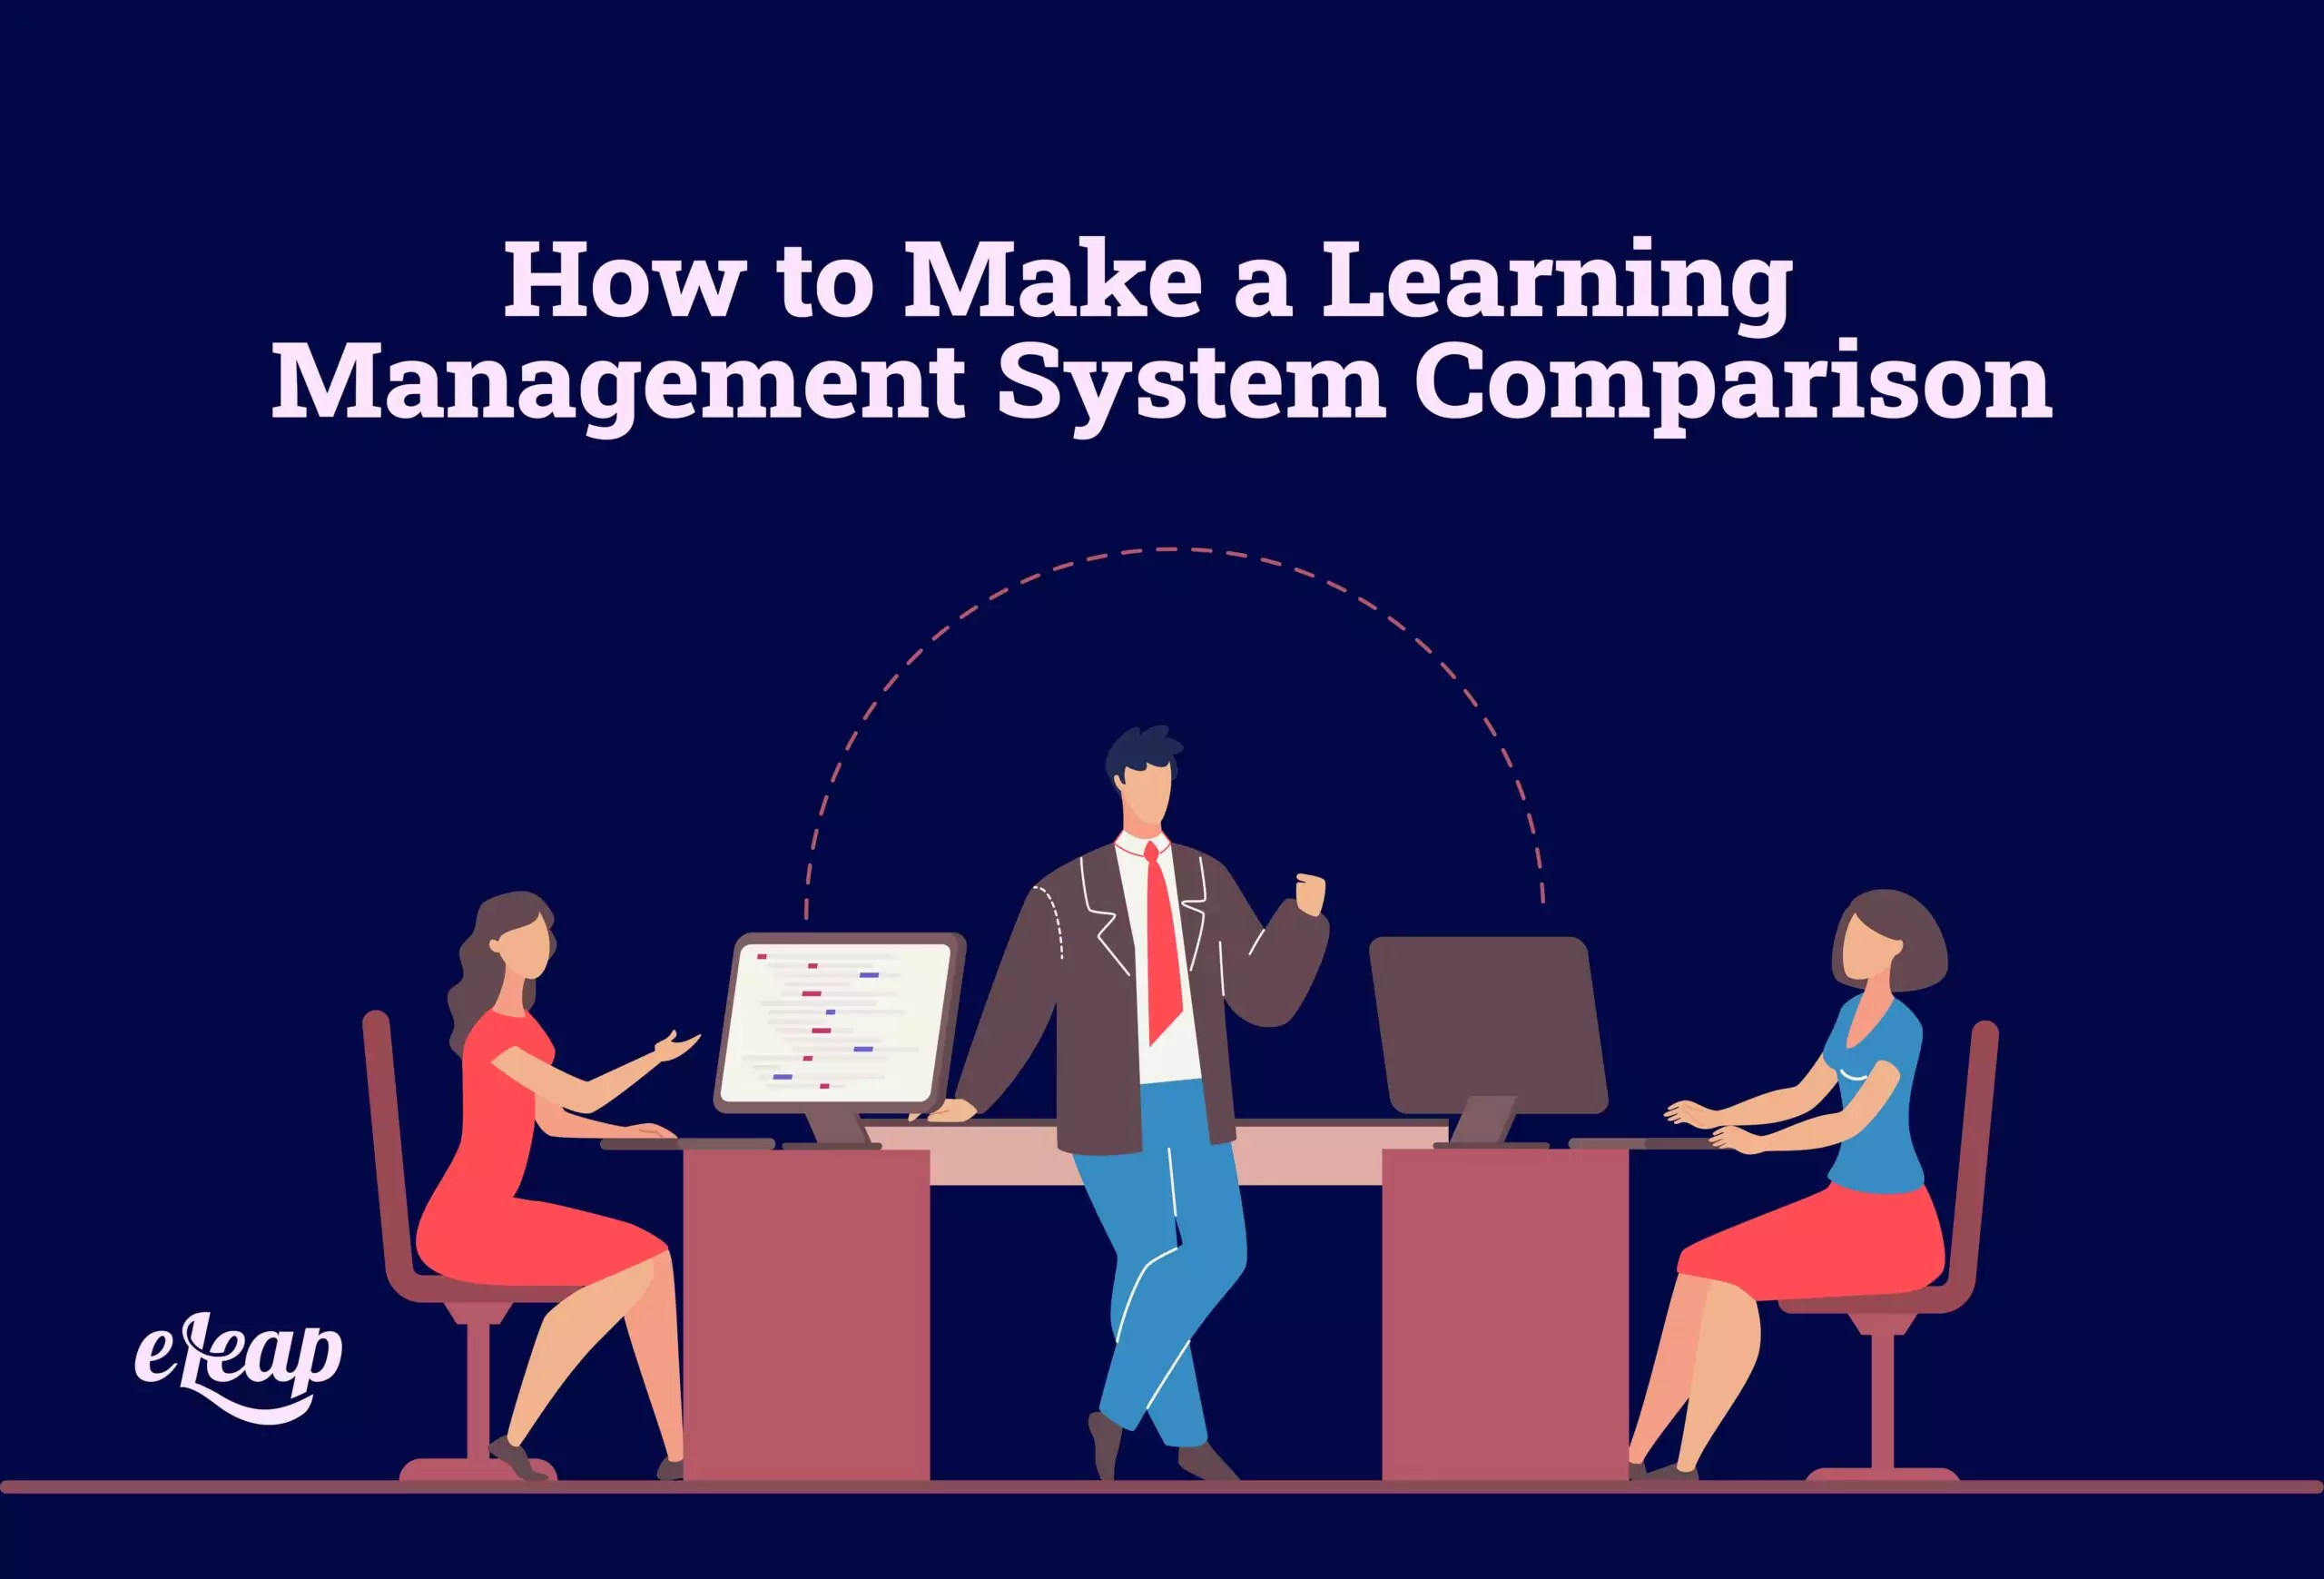 How to Make a Learning Management System Comparison